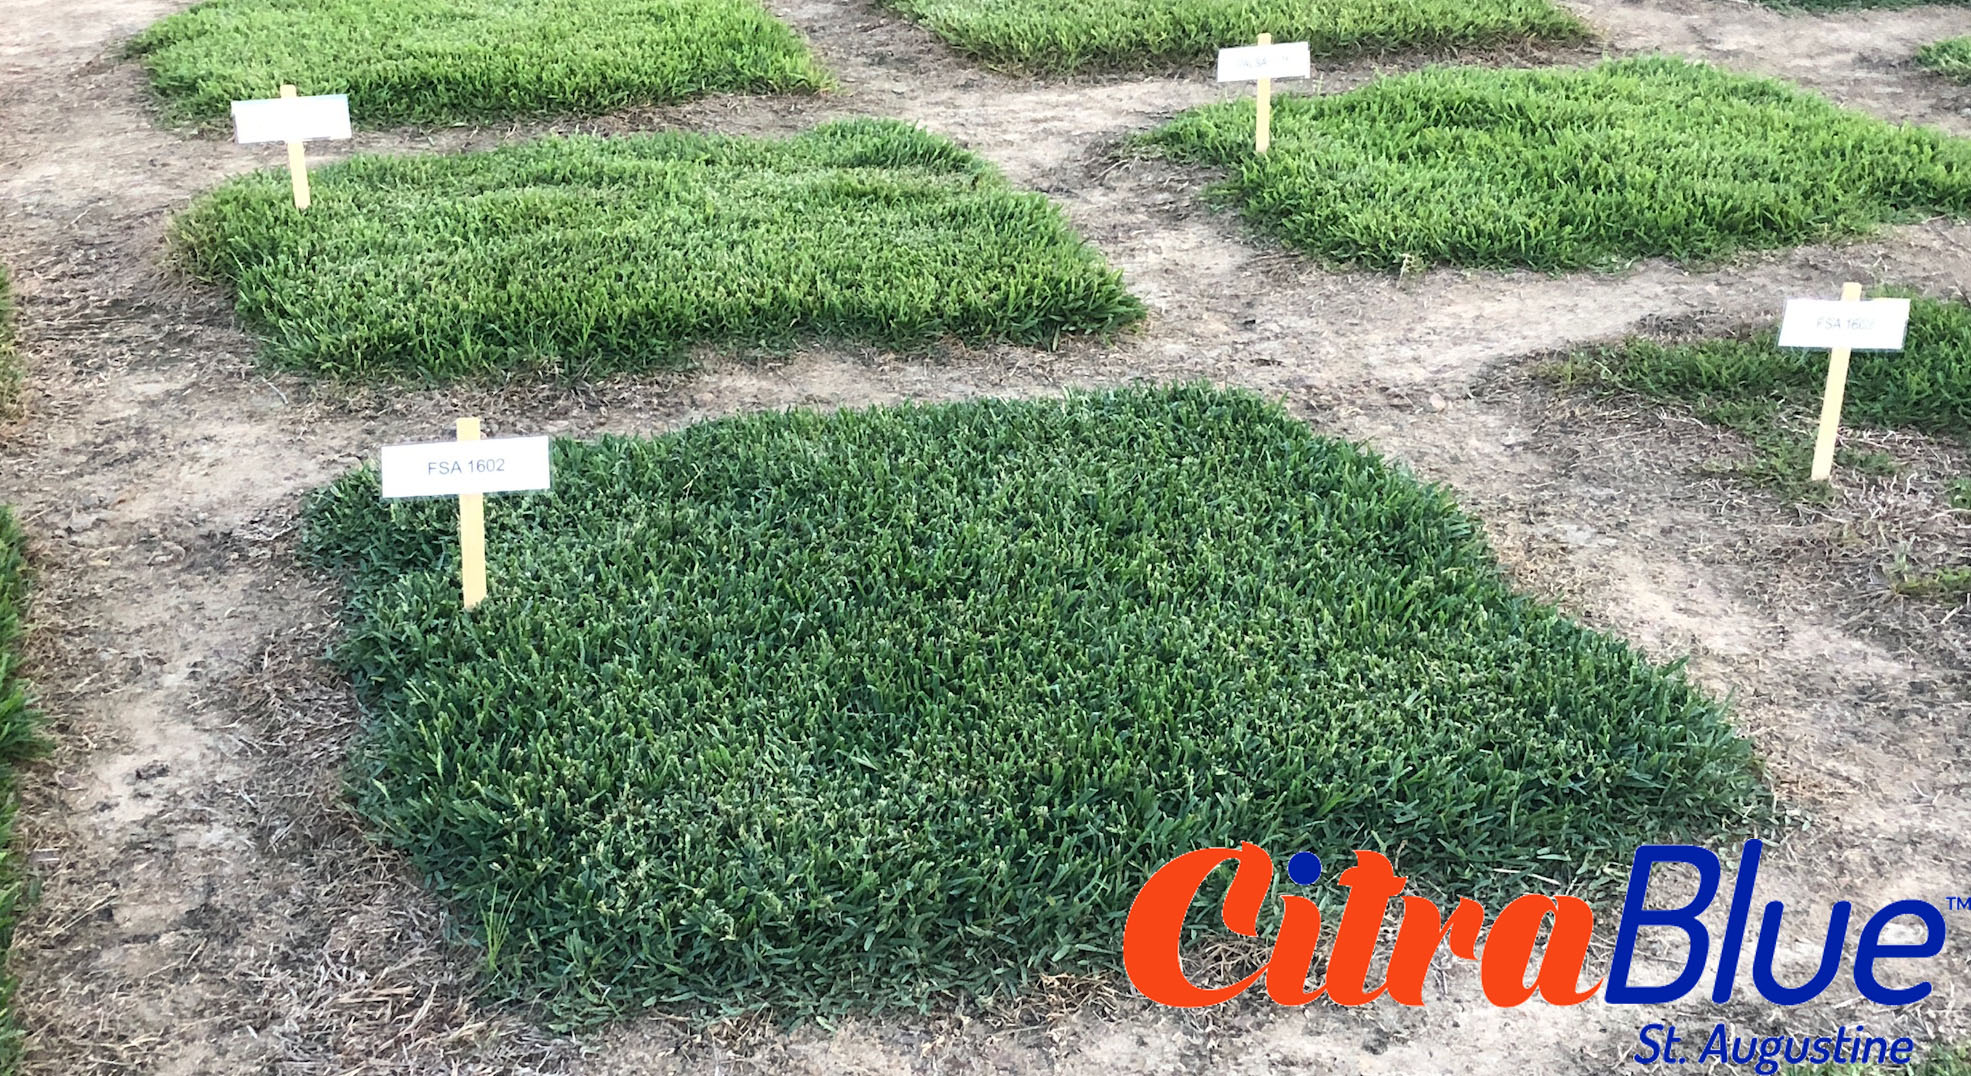 The Process of Breeding a New Turfgrass Variety